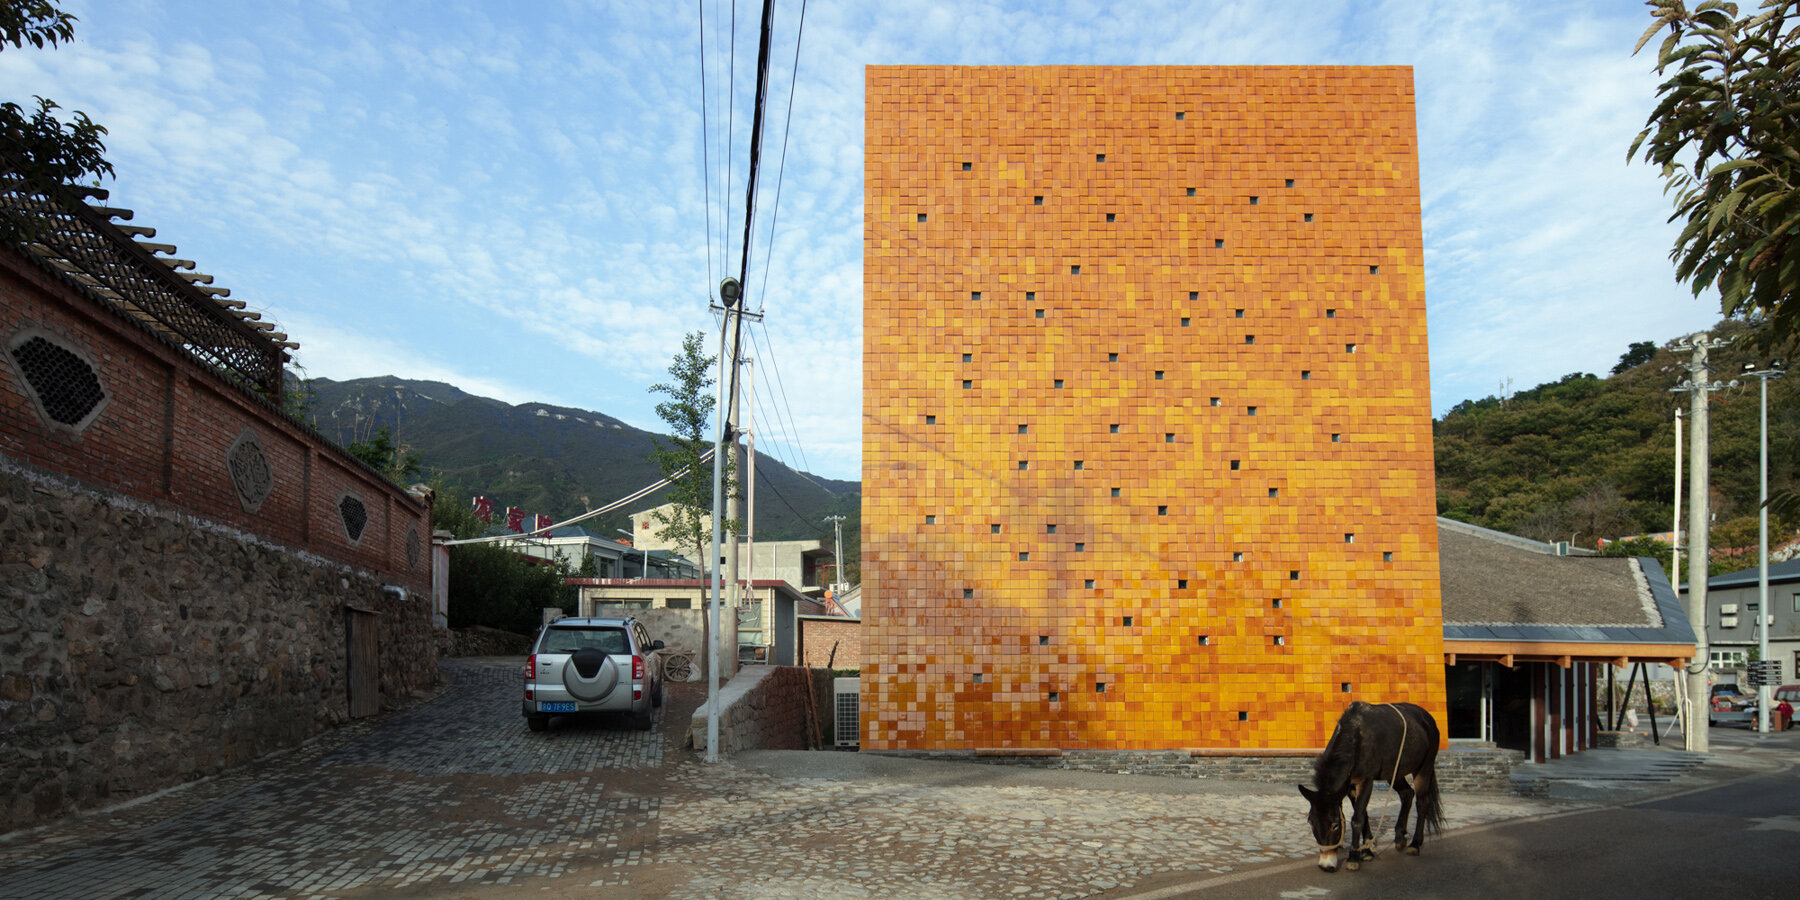 WAAAM museum’s glazed yellow facade enlivens the beigou village in china